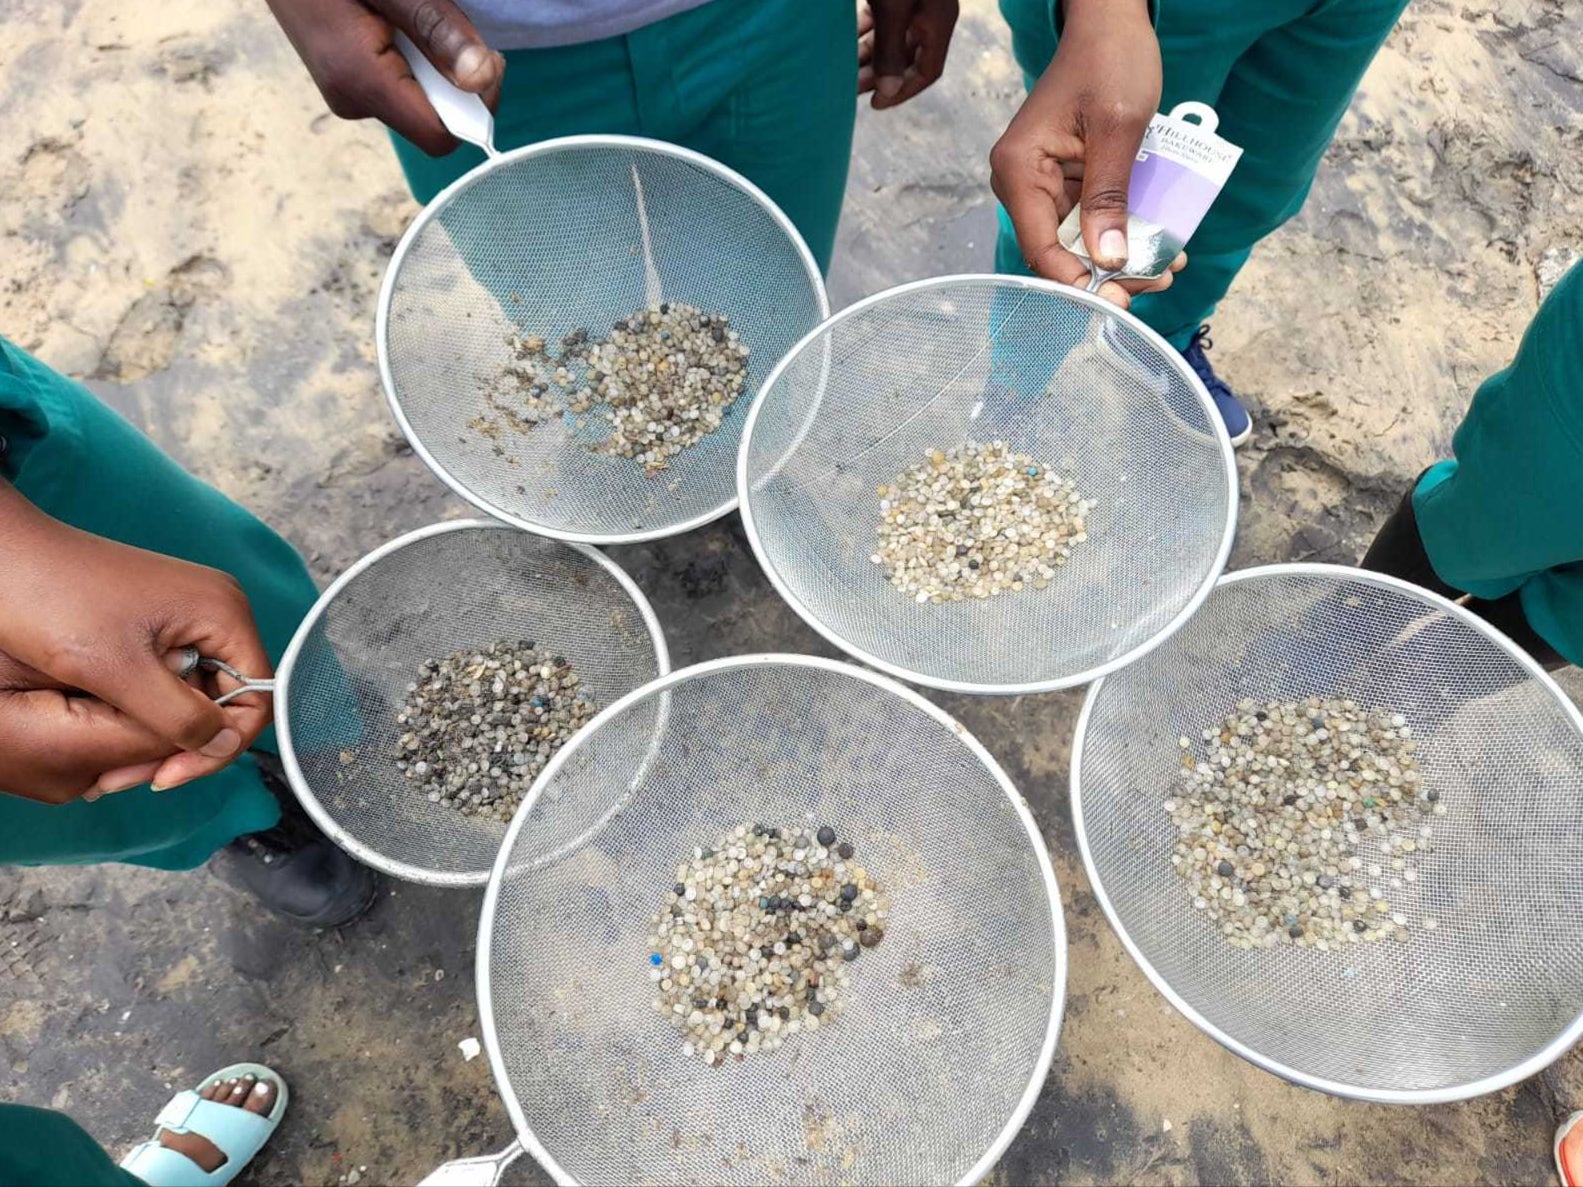 It is estimated 230,000 tonnes - trillions of nurdles - could be lost to the oceans globally, every year